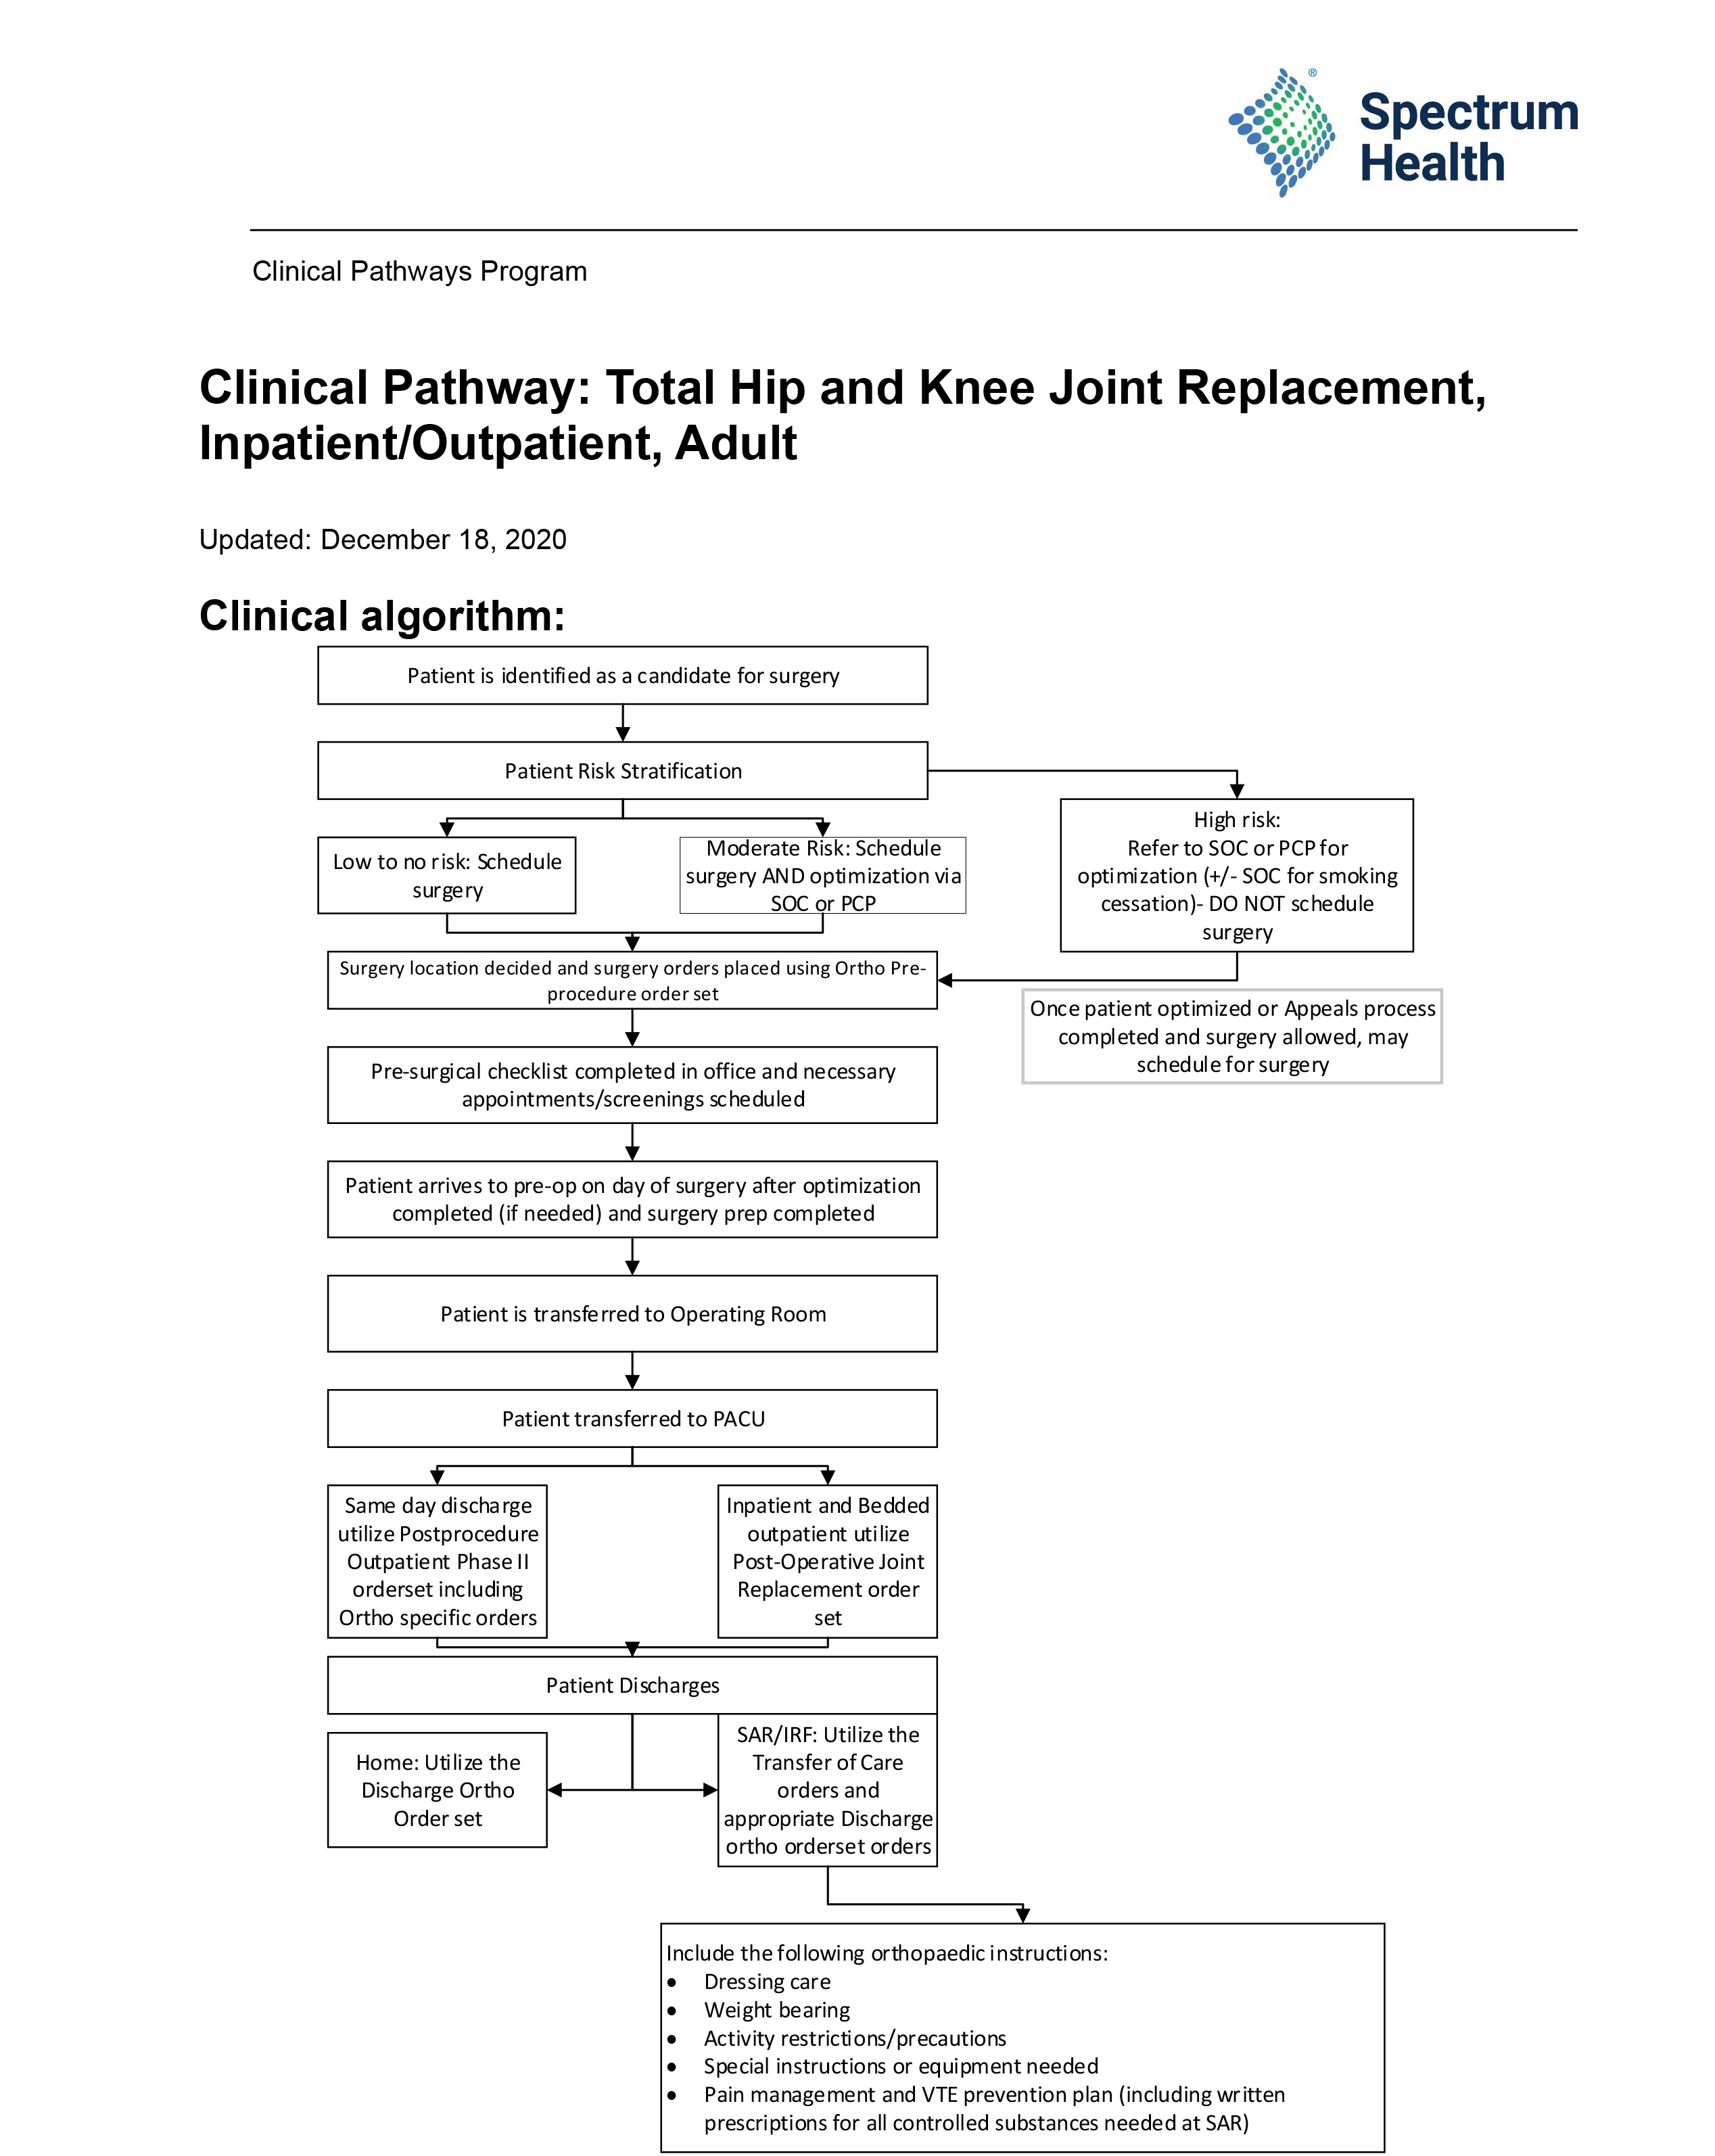 Clinical Guidelines Document Image 1